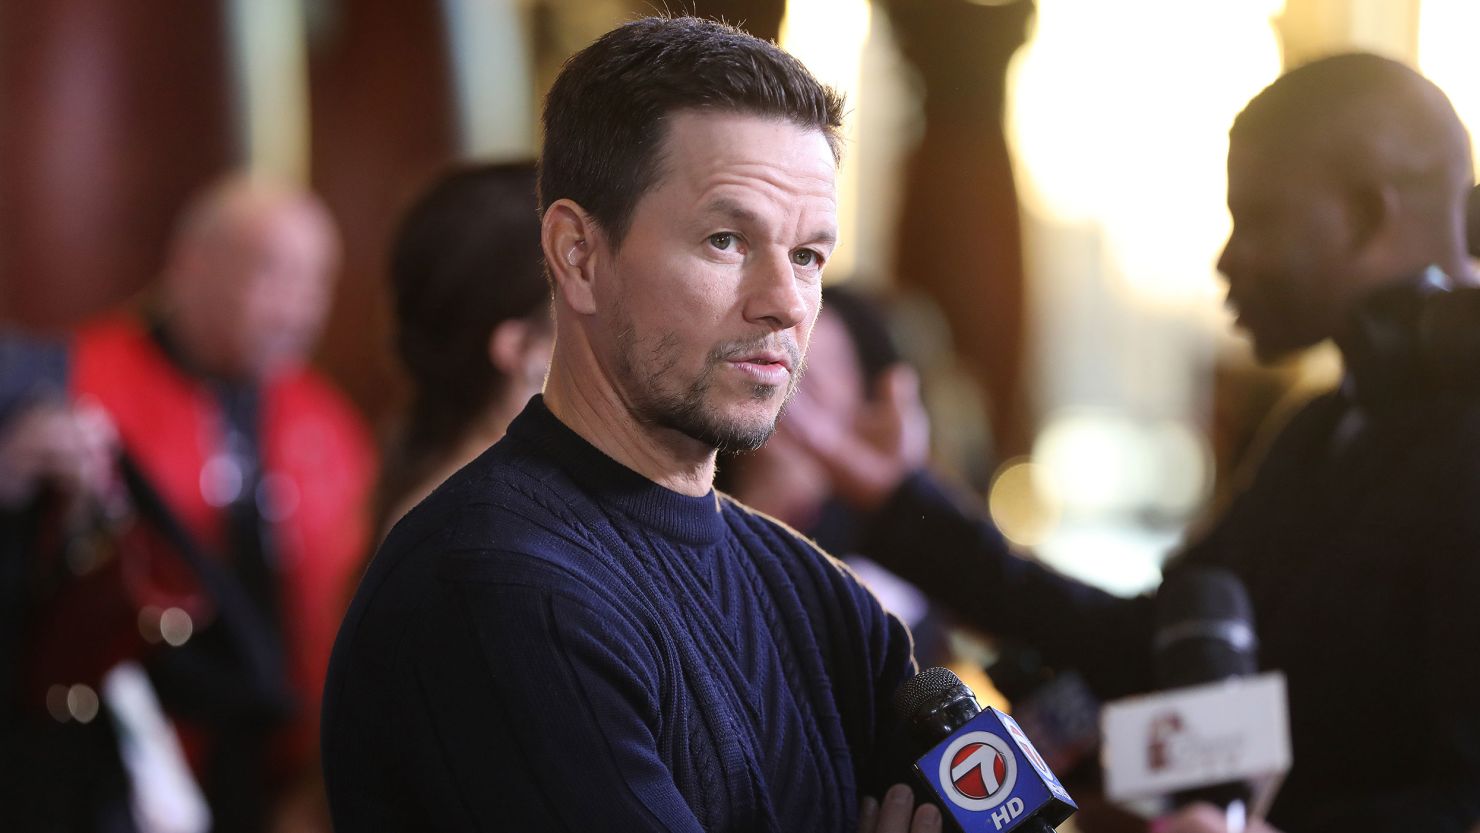 Mark Wahlberg explains why he moved out of California | CNN